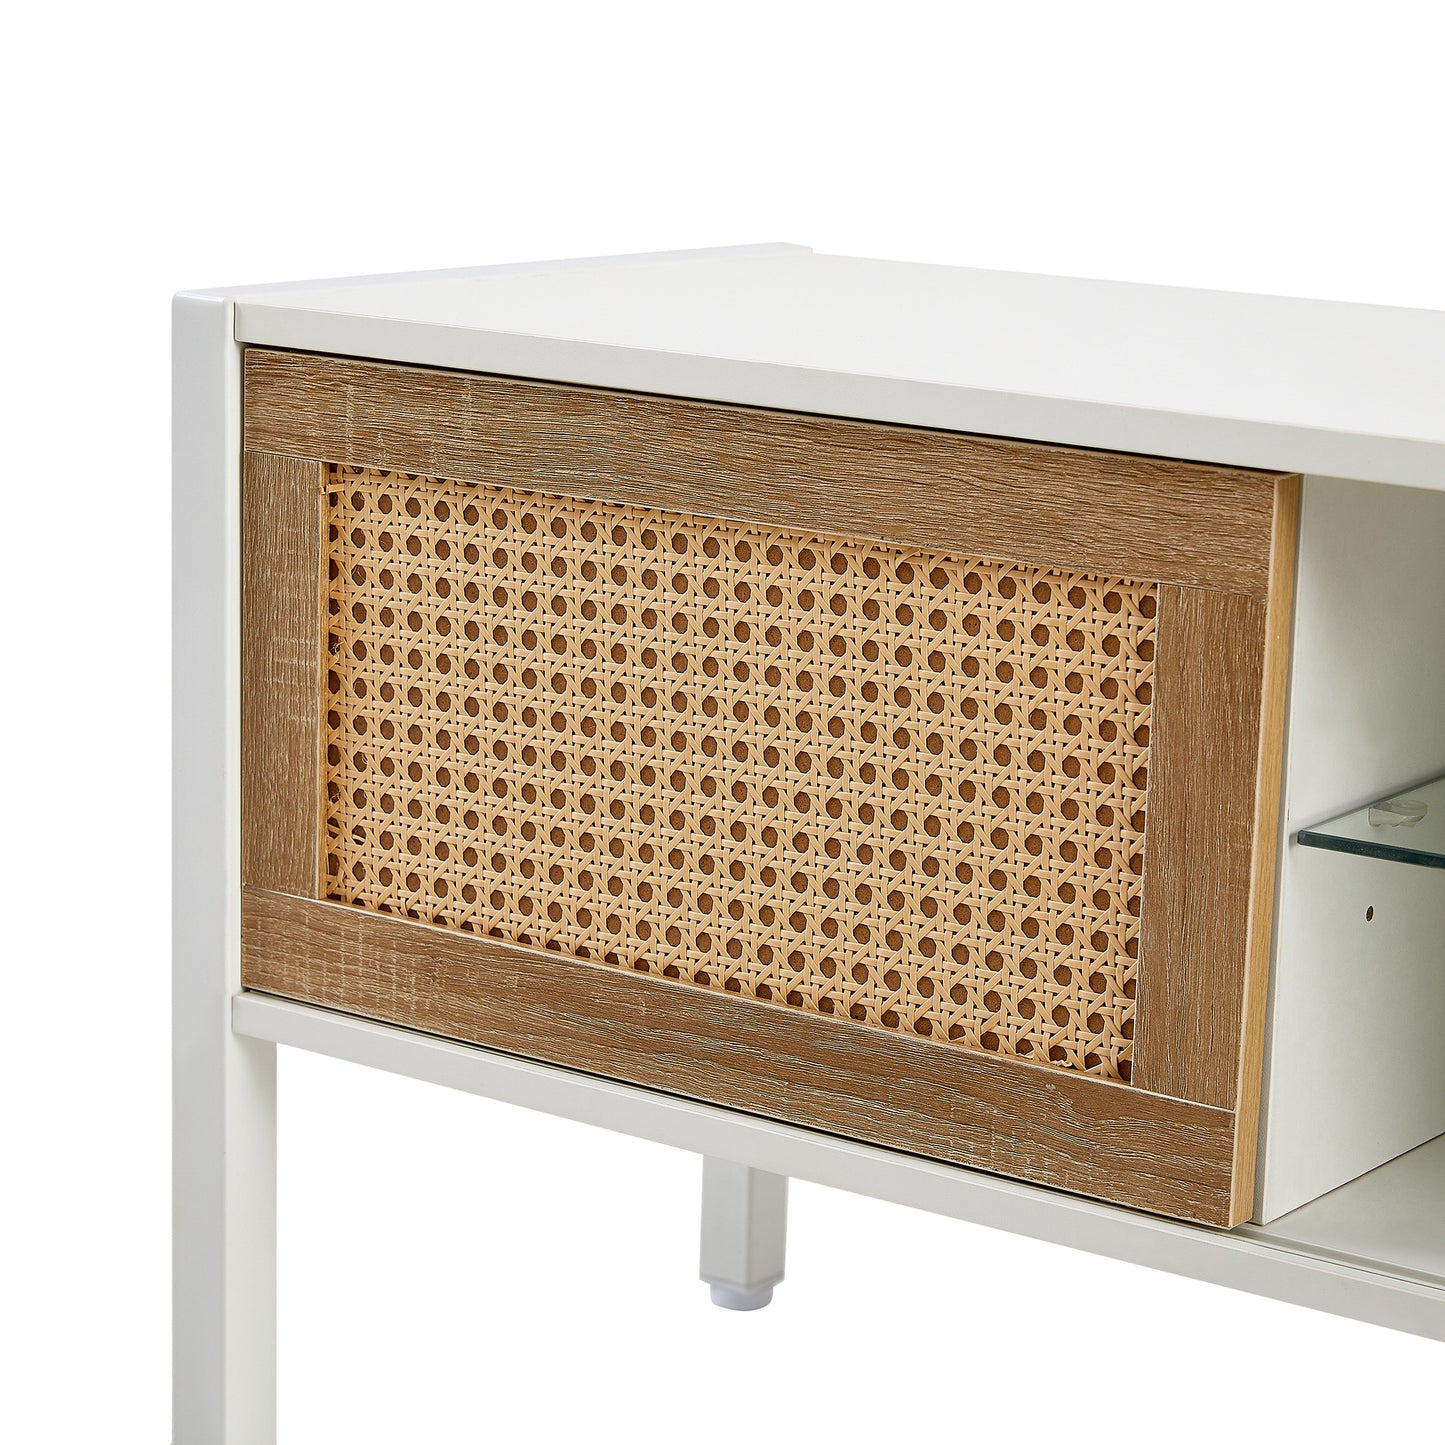 Rattan TV cabinet with variable color light strip.